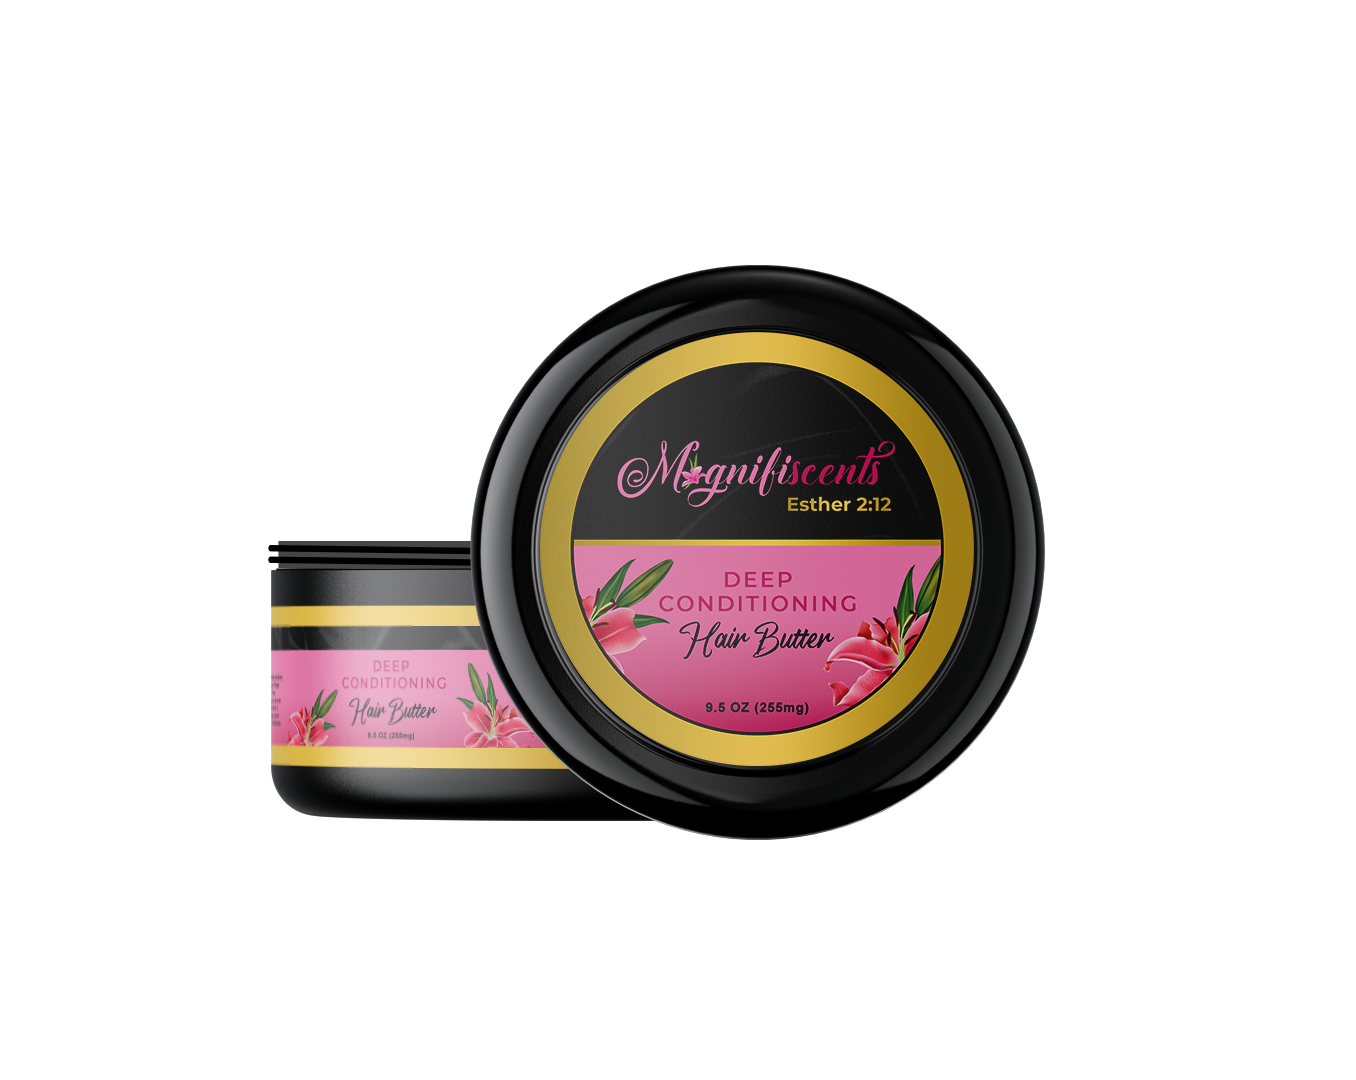 Deep Conditioning Hair Butter - Magnifiscents Handmade